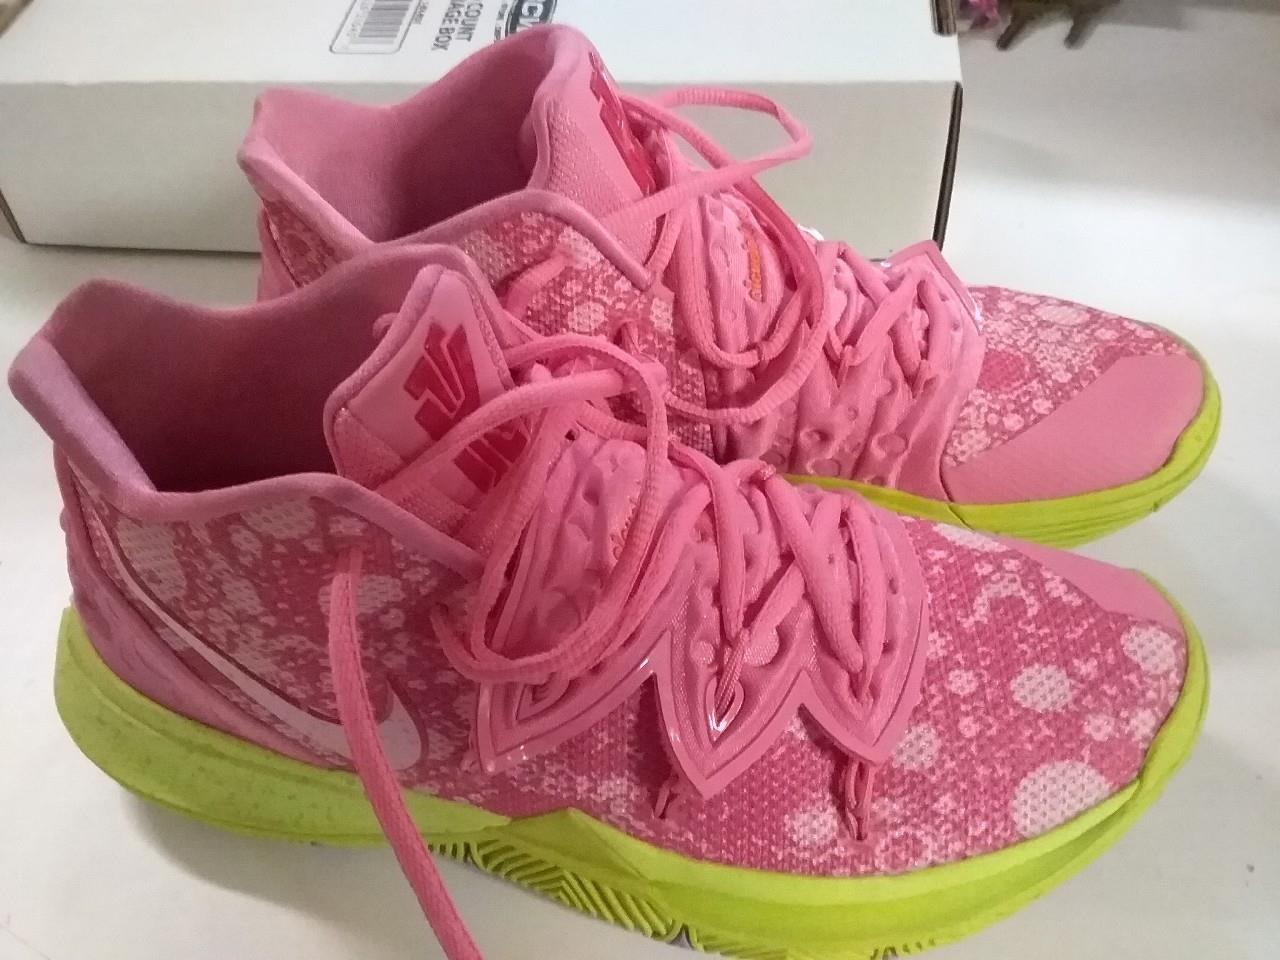 kyrie irving 5 pink